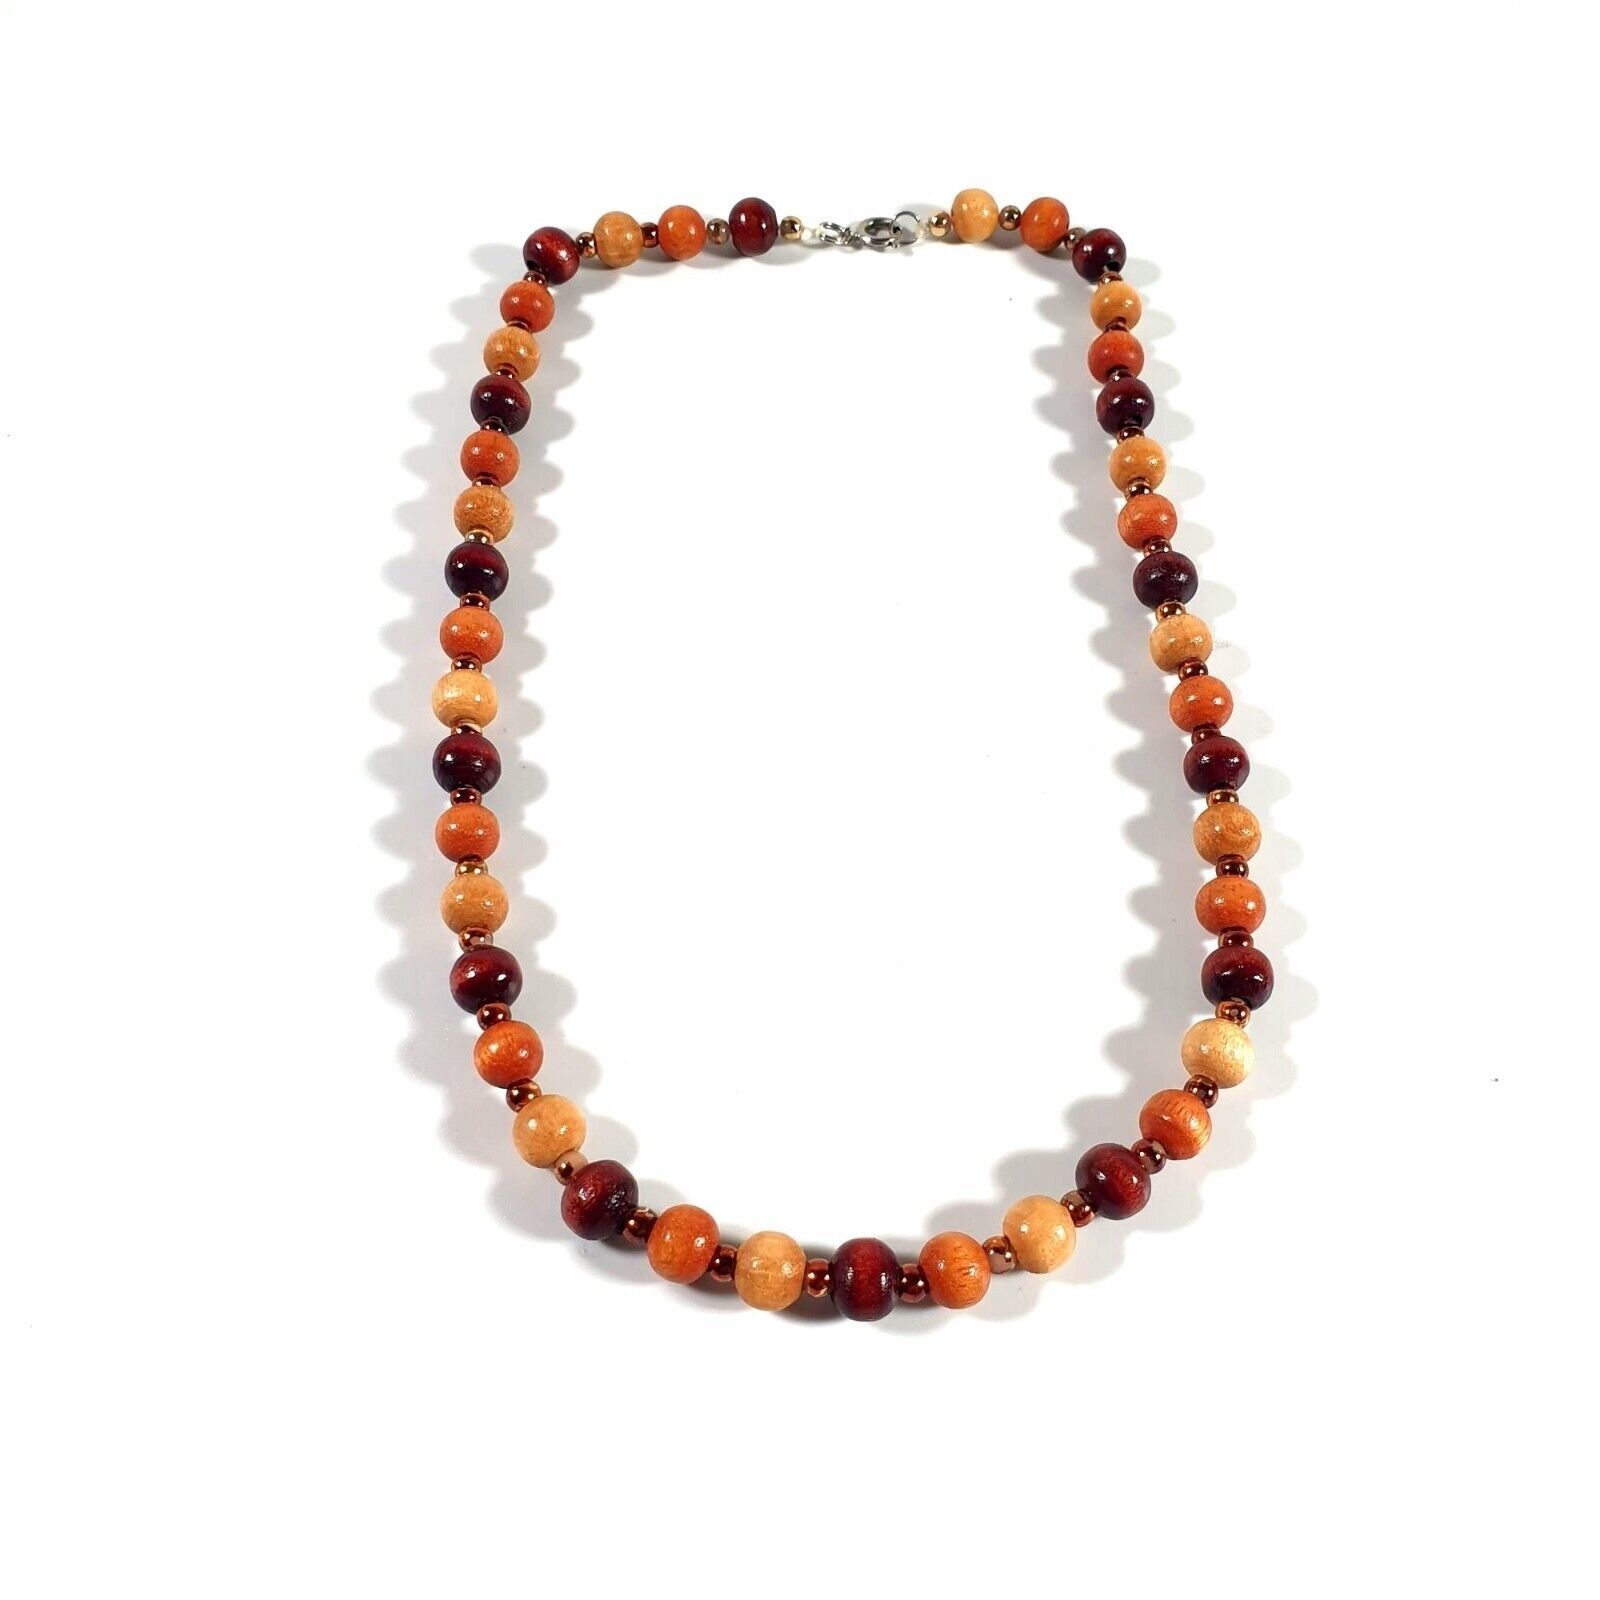 Primary image for Necklace Womens Vintage Wooden Bead Jewelry 16" Length Handmade Costume